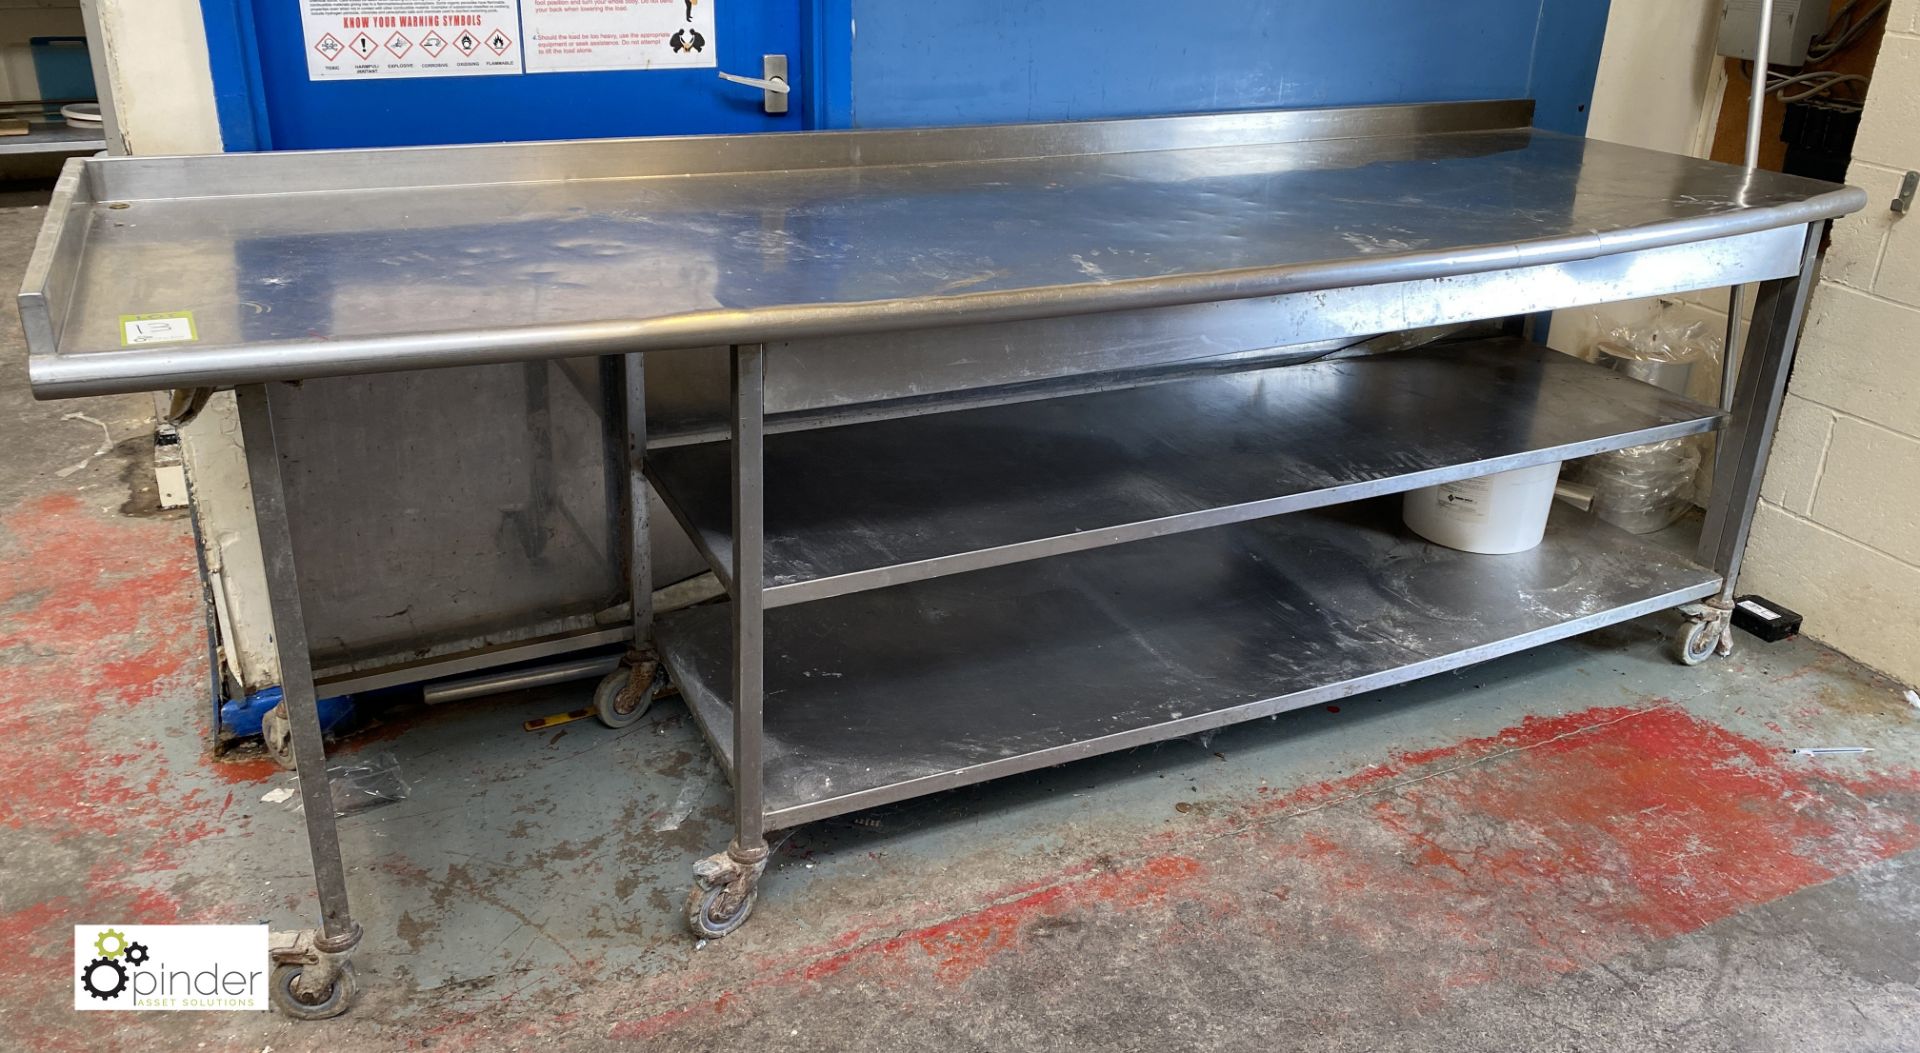 Stainless steel mobile Preparation Table, 2620mm x 750mm x 900mm, with left hand, rear lip and 2